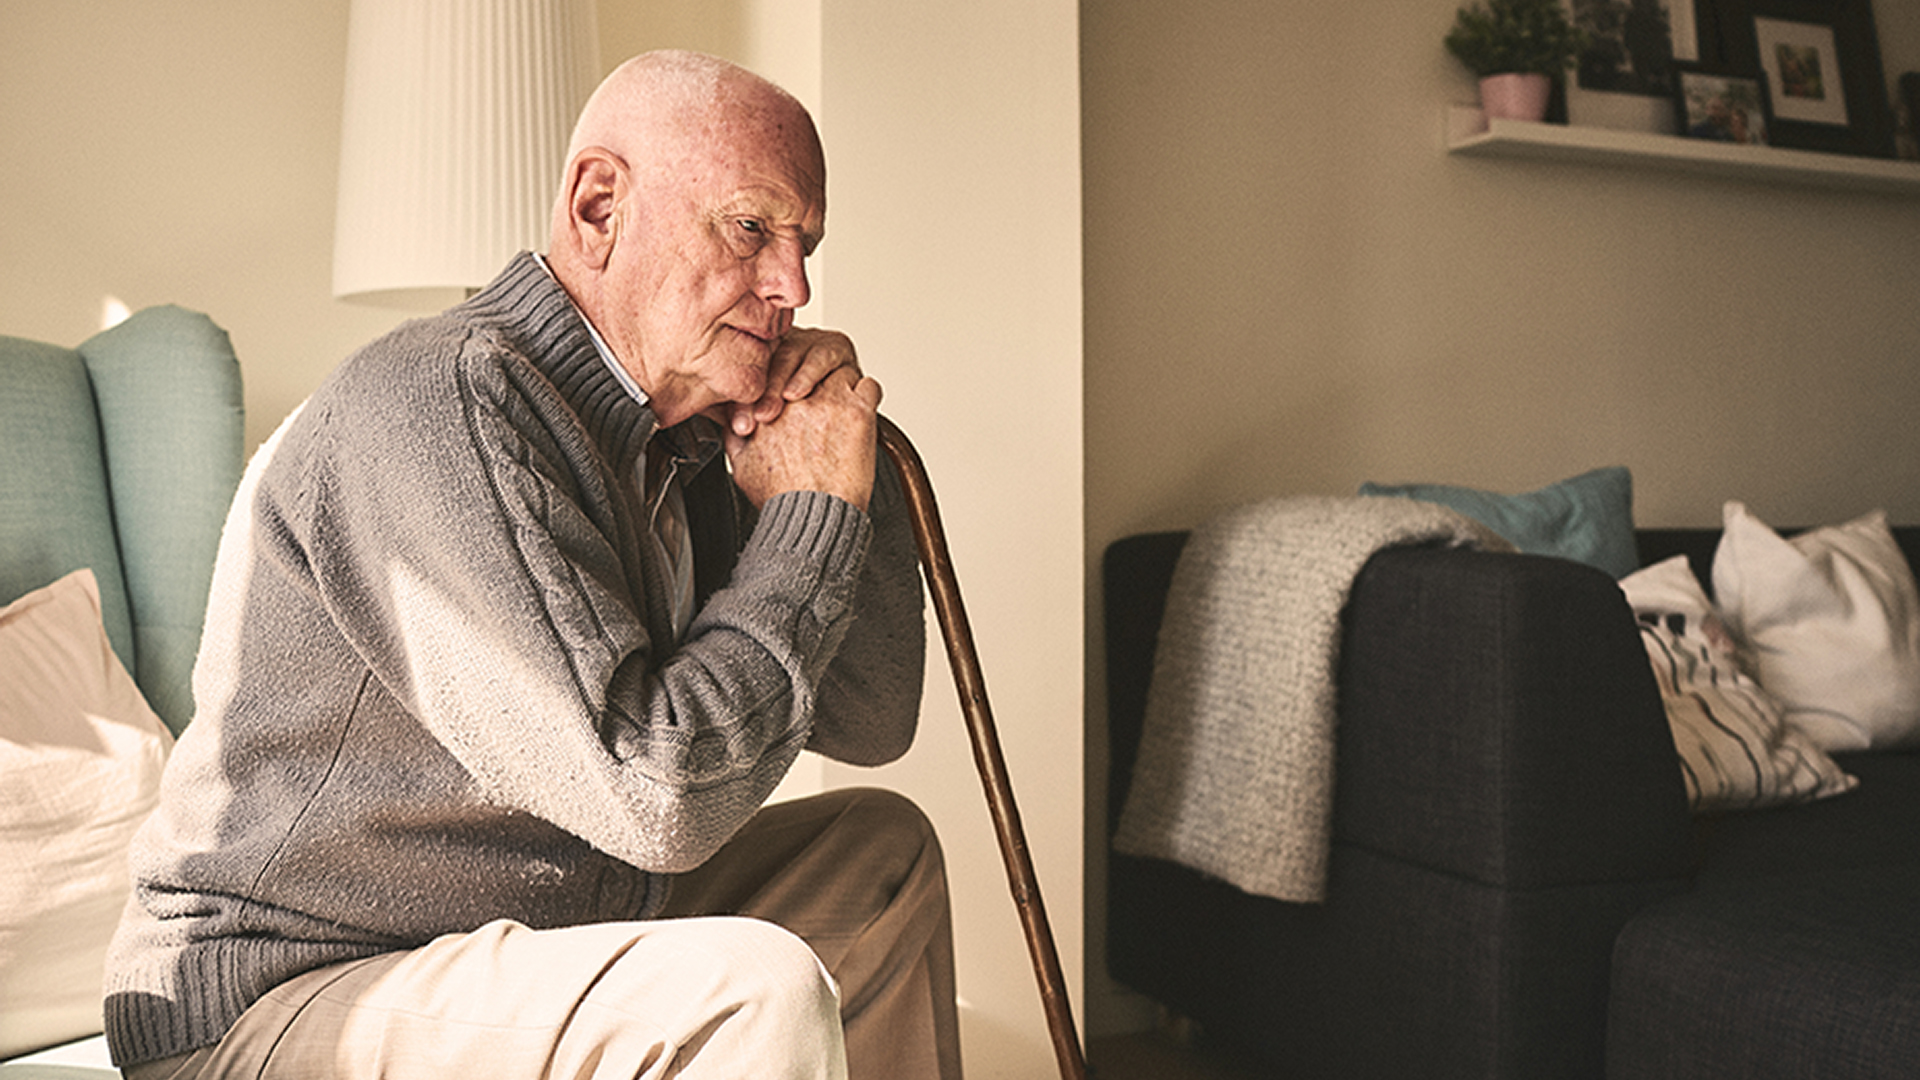 man with lewy body dementia sitting on a chair with a cane